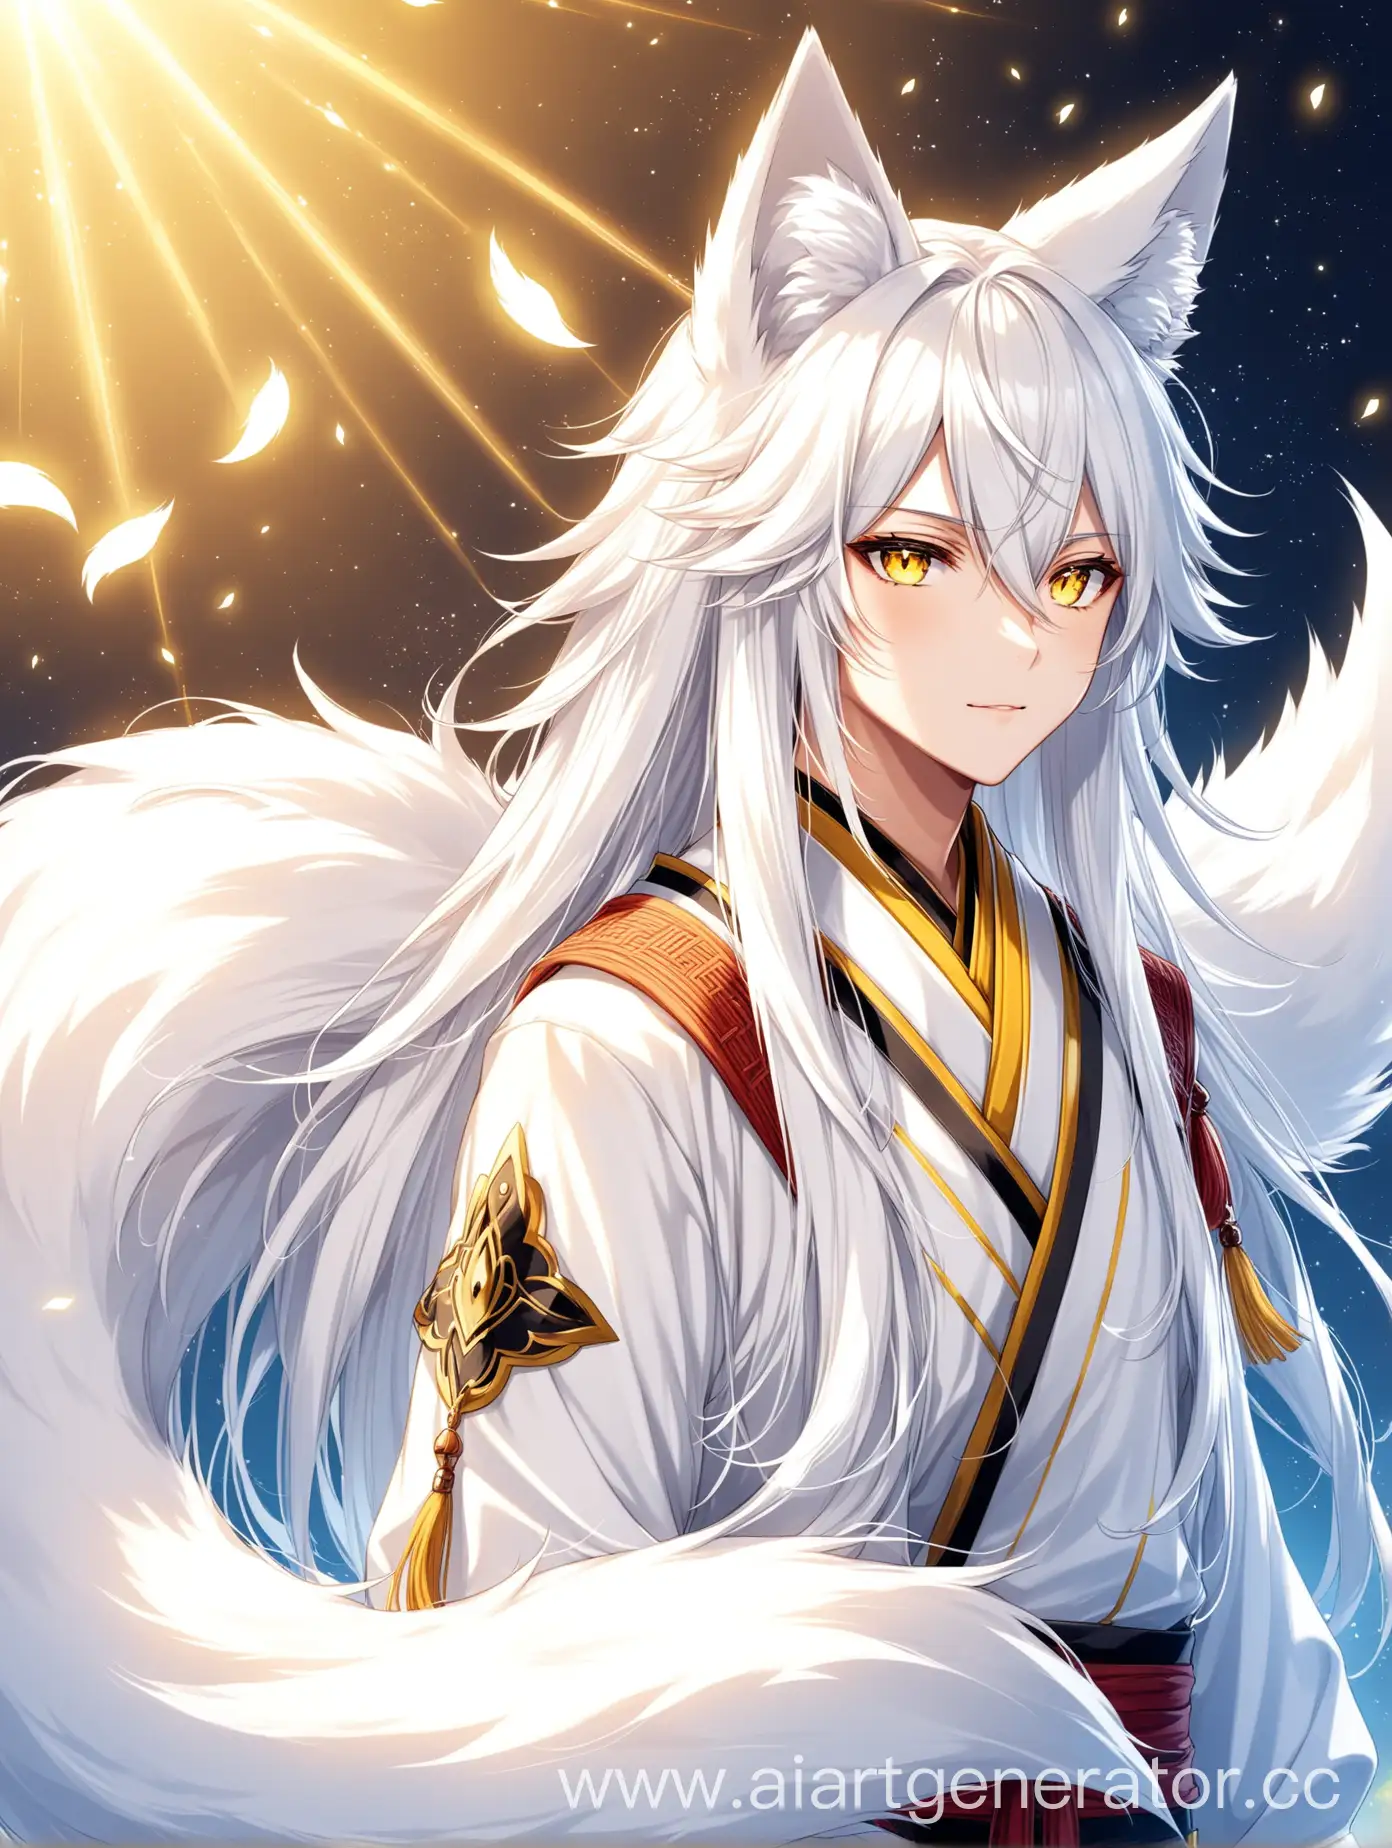 Bright-Kitsune-Anime-Character-with-Long-White-Hair-and-Fox-Features